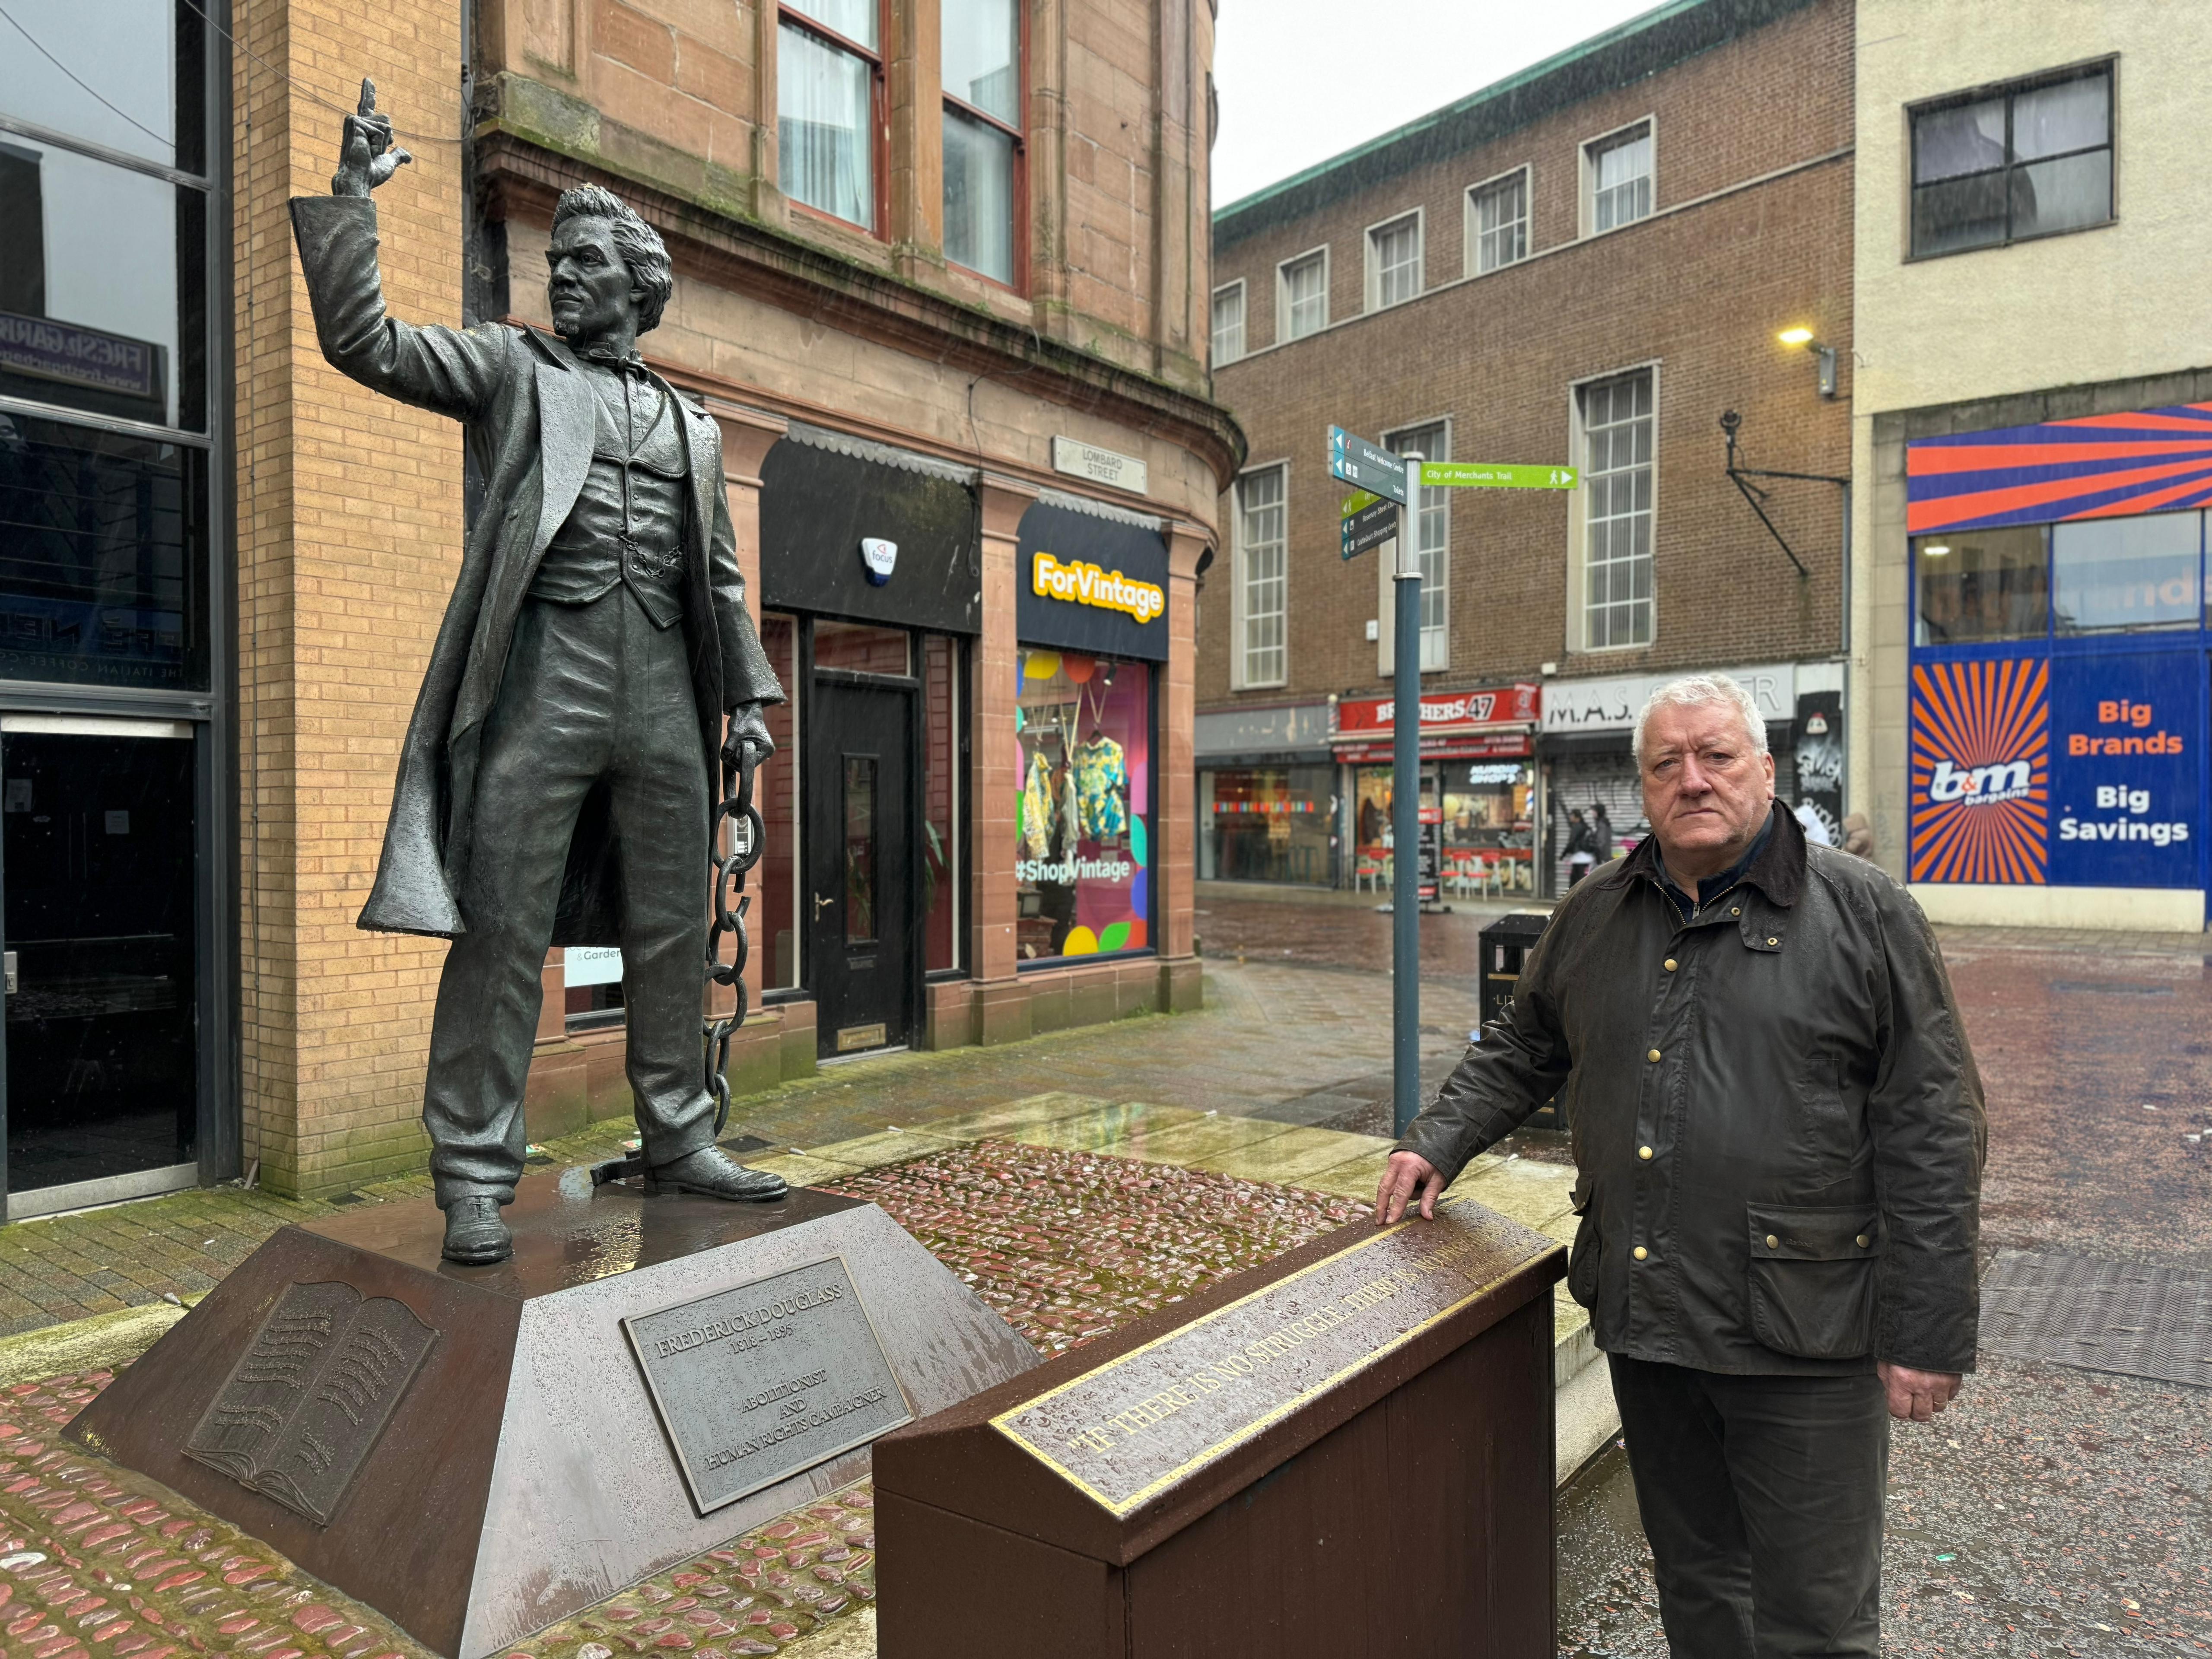 SUPPORT: SDLP Cllr Pat Catney at the Frederick Douglass statue in Belfast